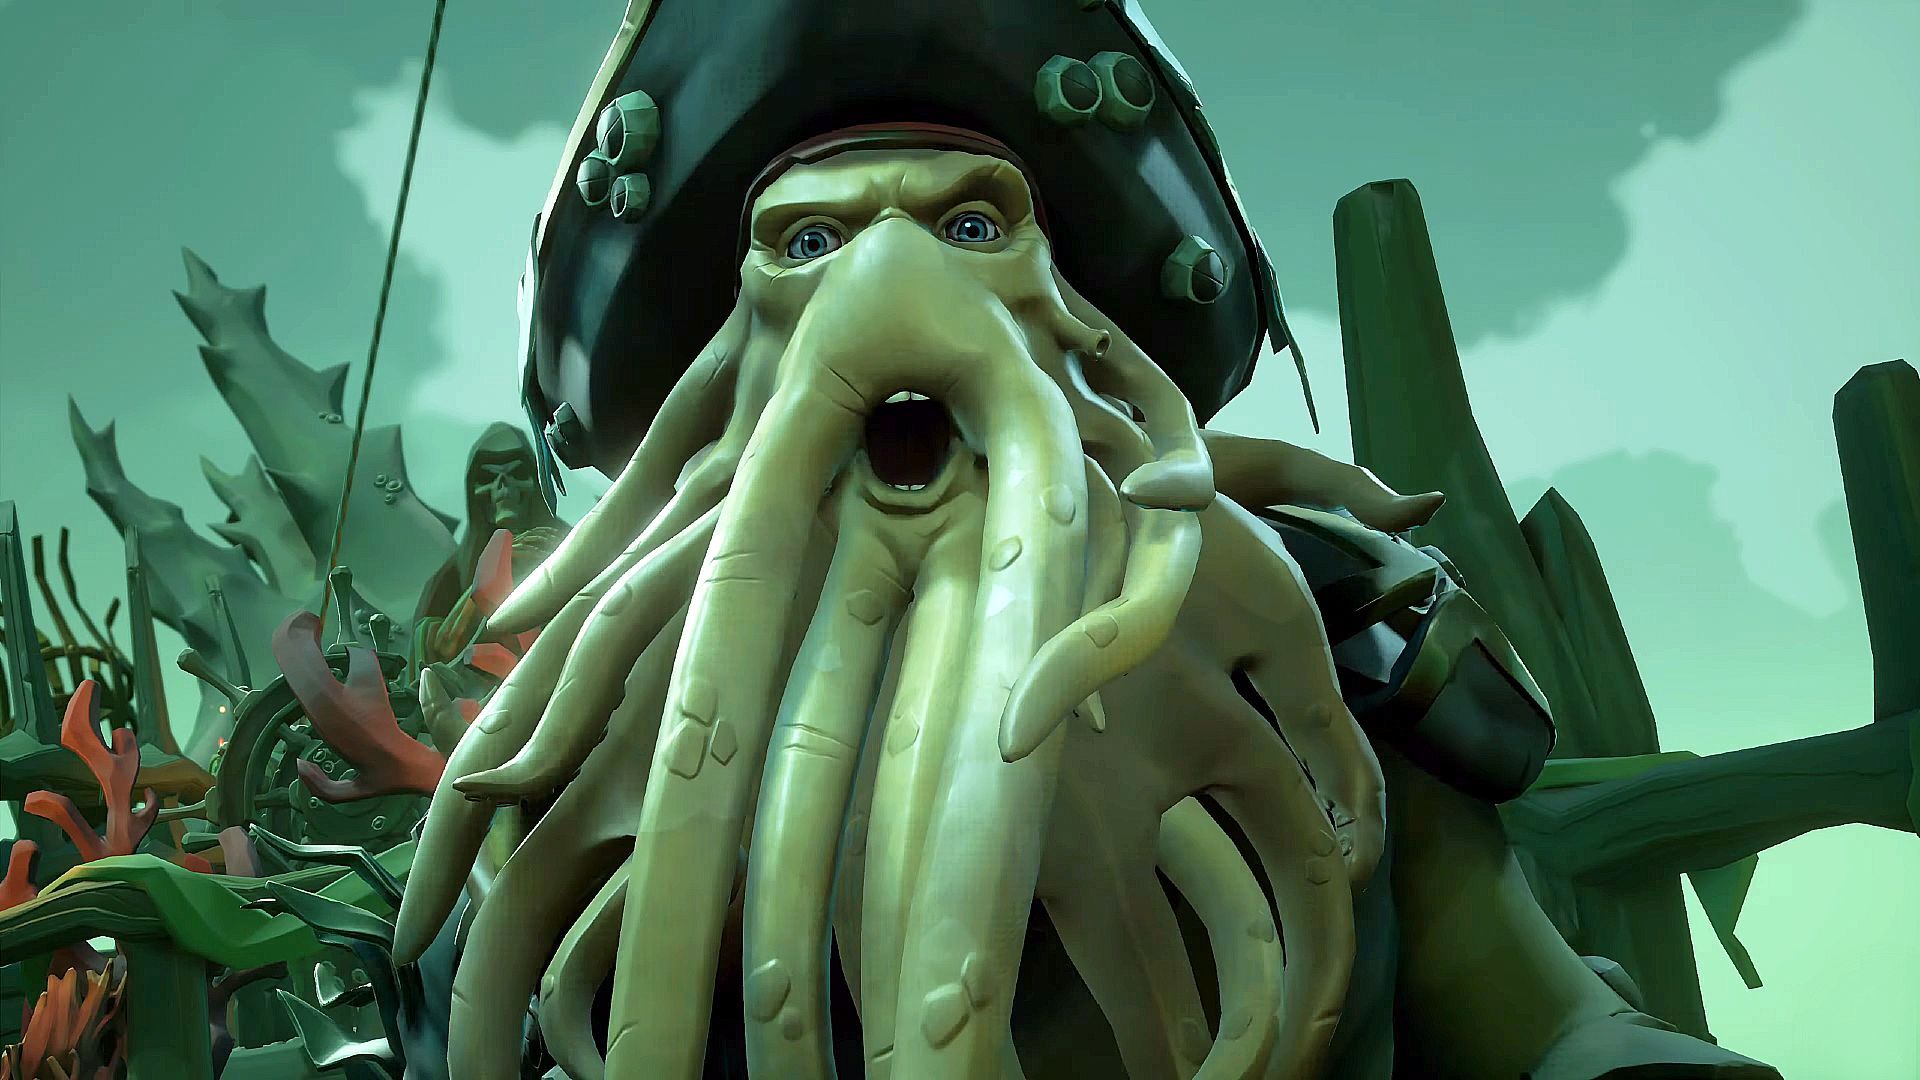 sea-of-thieves-a-pirate-s-life-is-free-pirates-of-the-caribbean-dlc-out-this-month